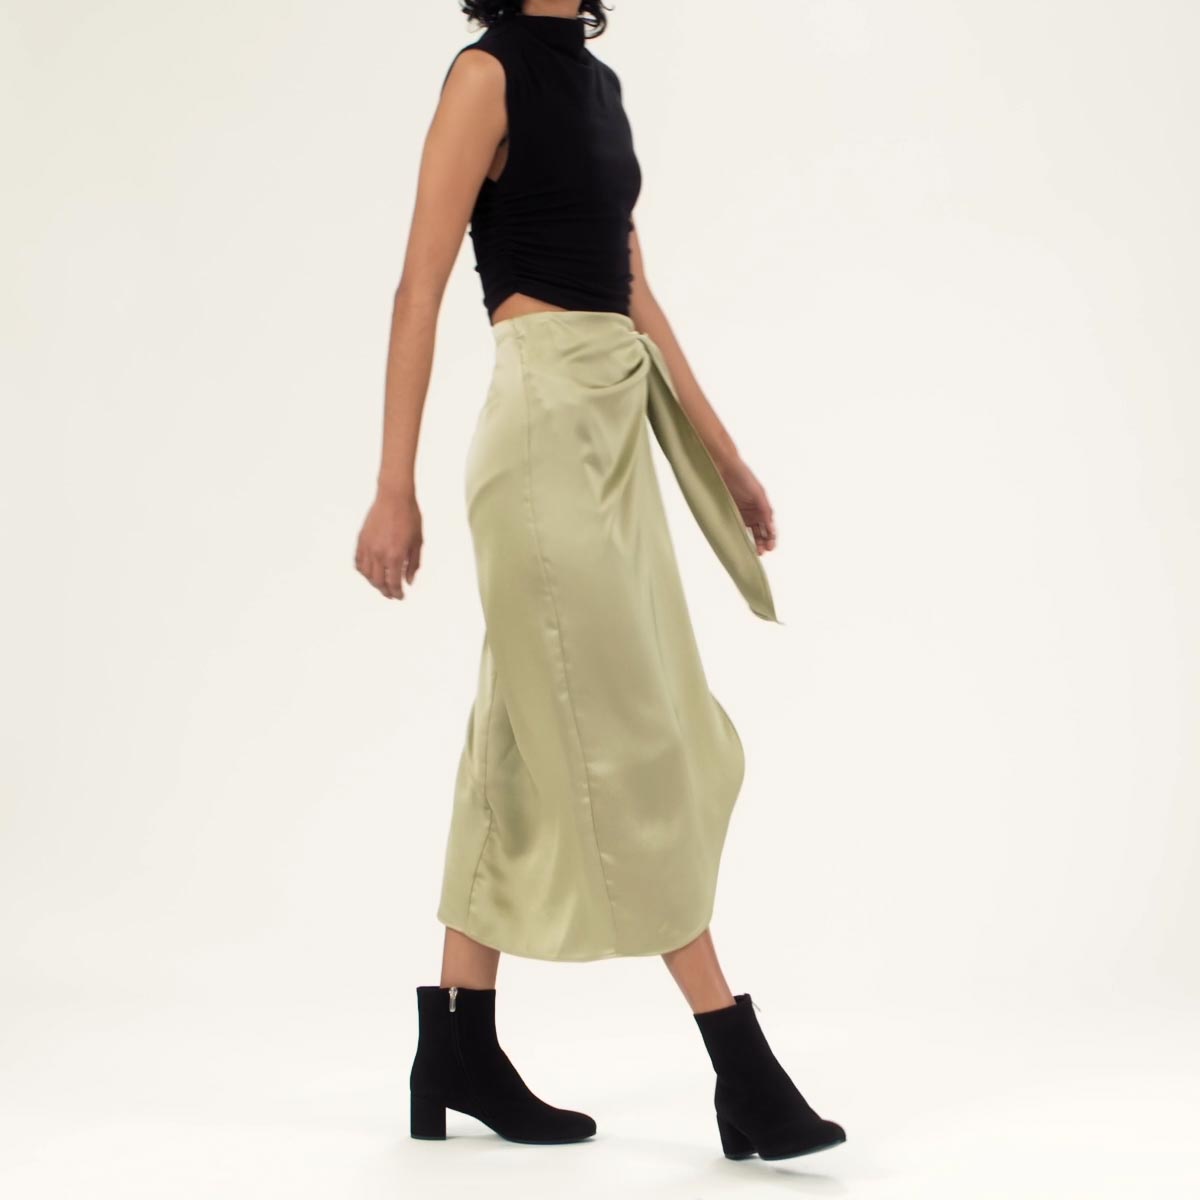 The Boot in Black Suede shown on model styled with a light green silk midi skirt and a sleeveless mock neck top in black.